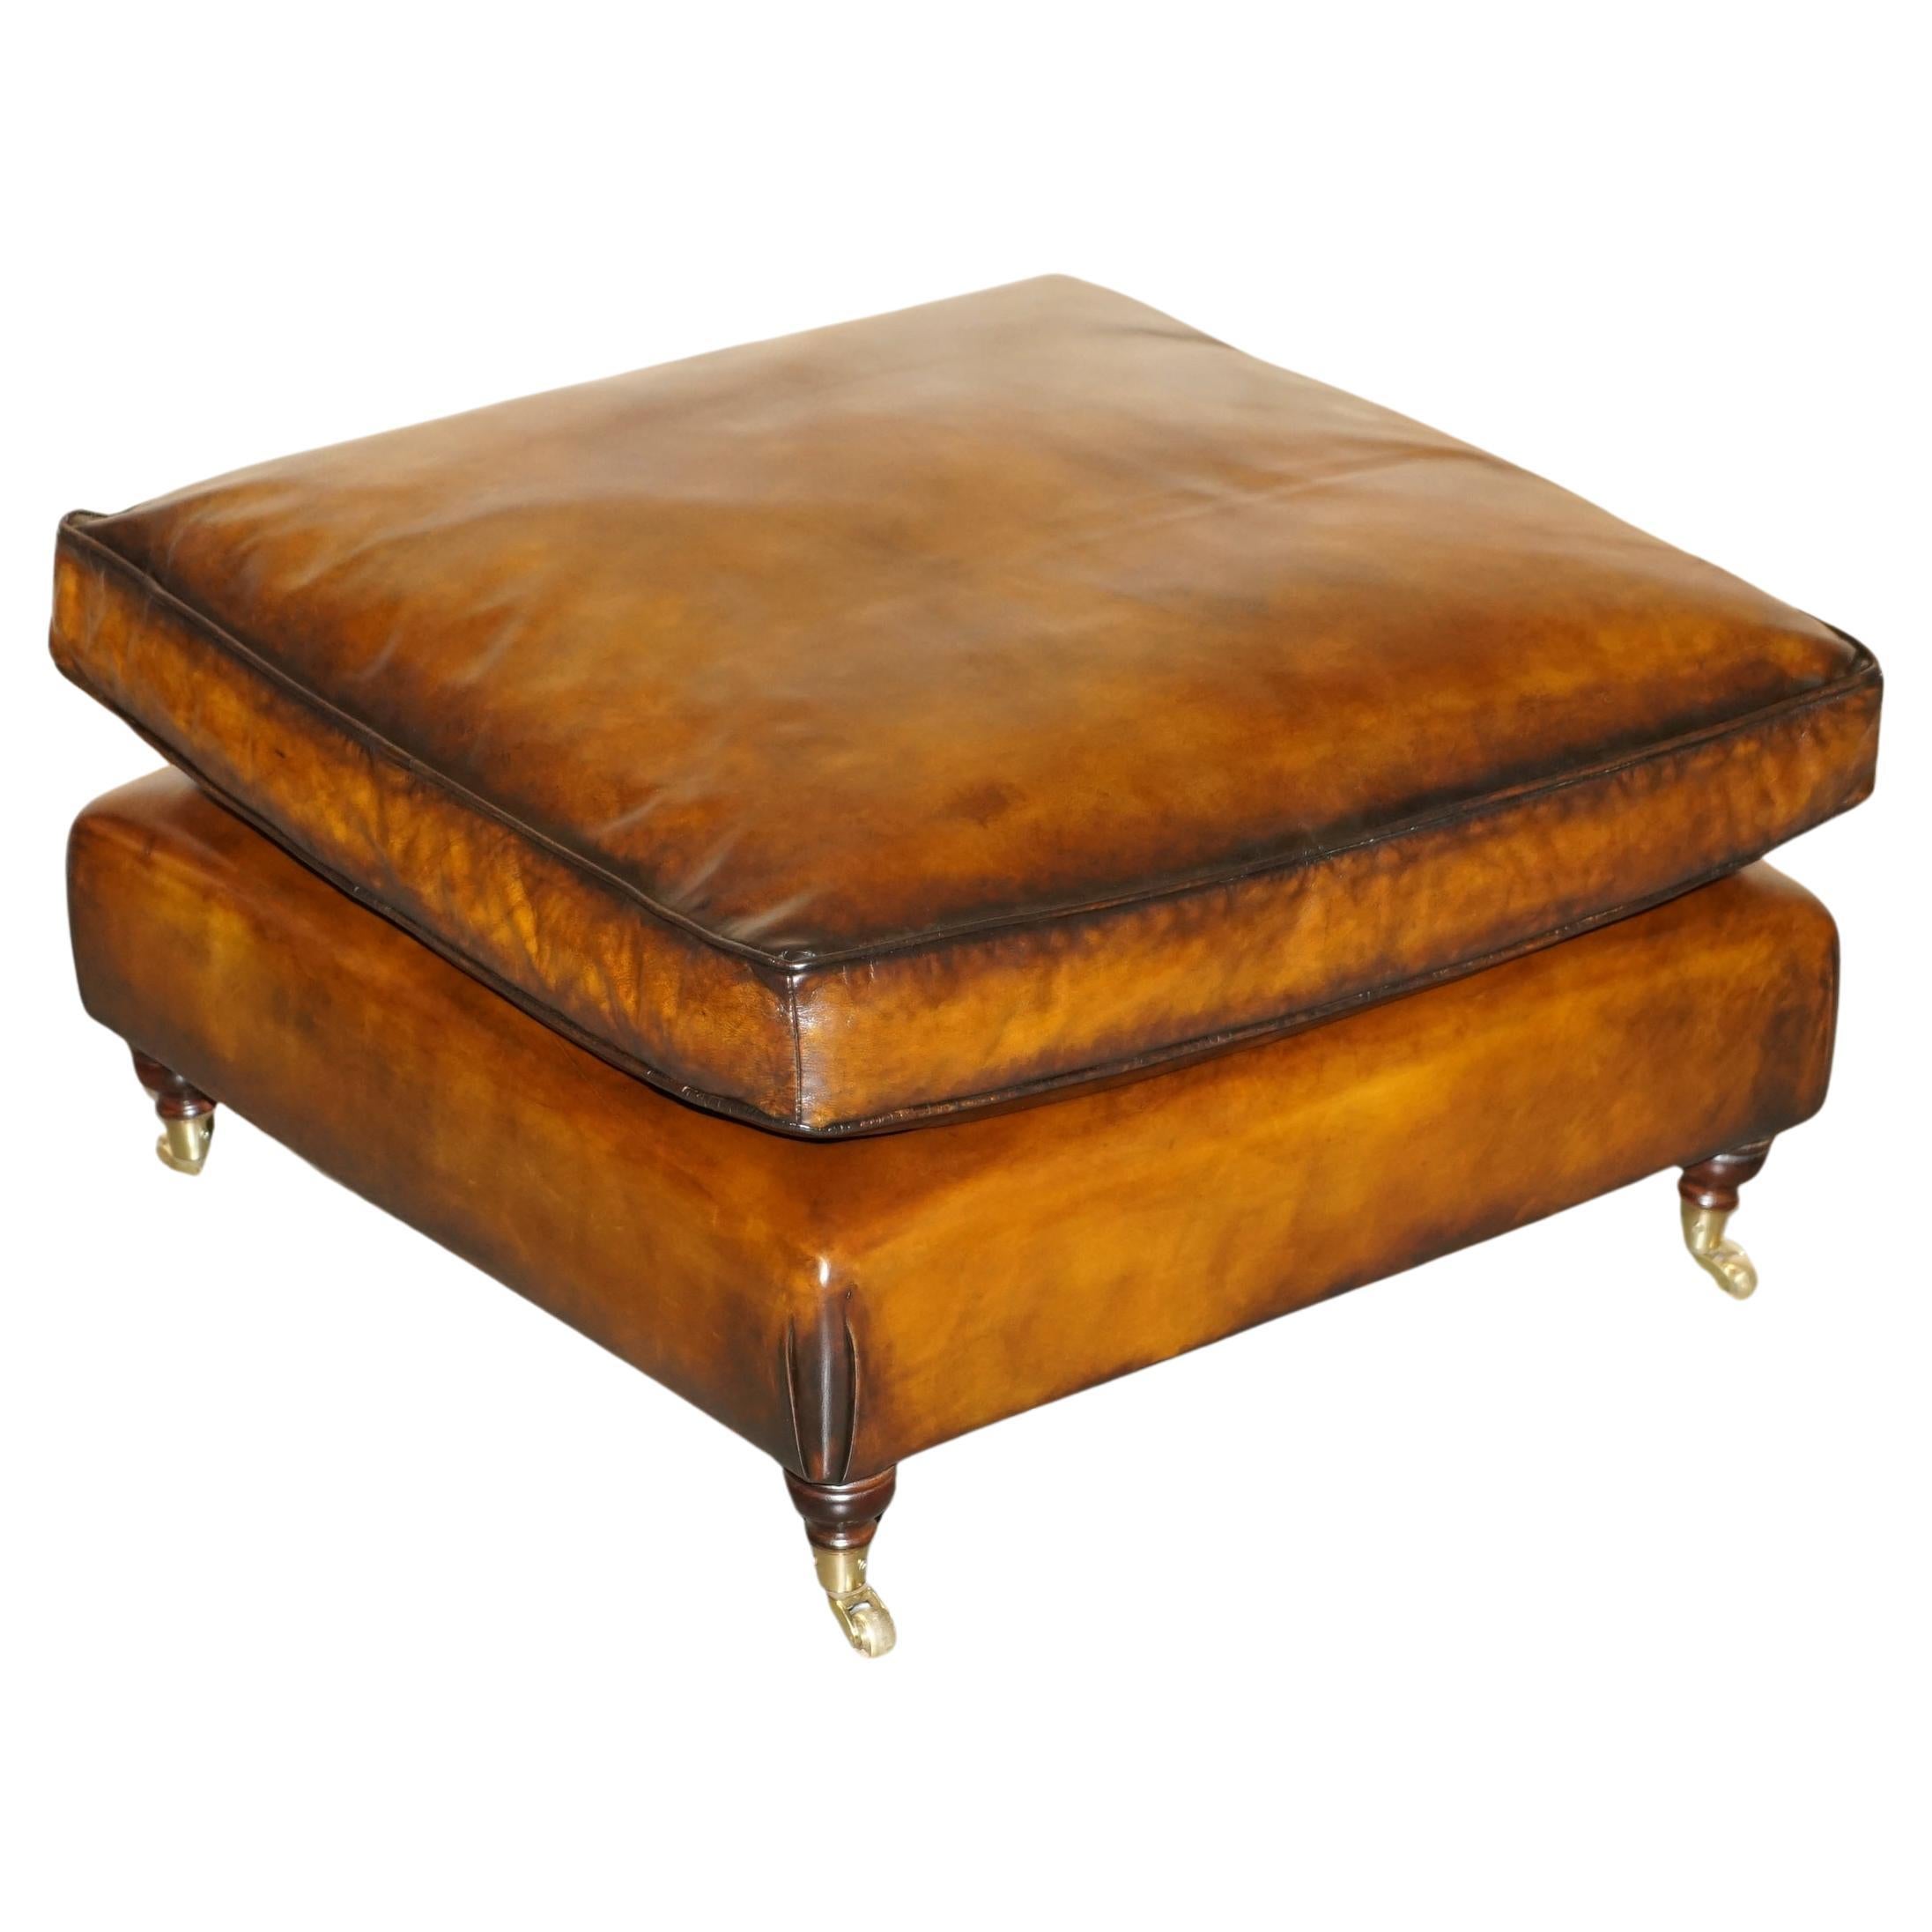 EXTRA LARGE FEATHER SEATHER SEAT RESTORED BROWN LEATHER OTTOMAN FOOTSTOOL PART OF SUiTE